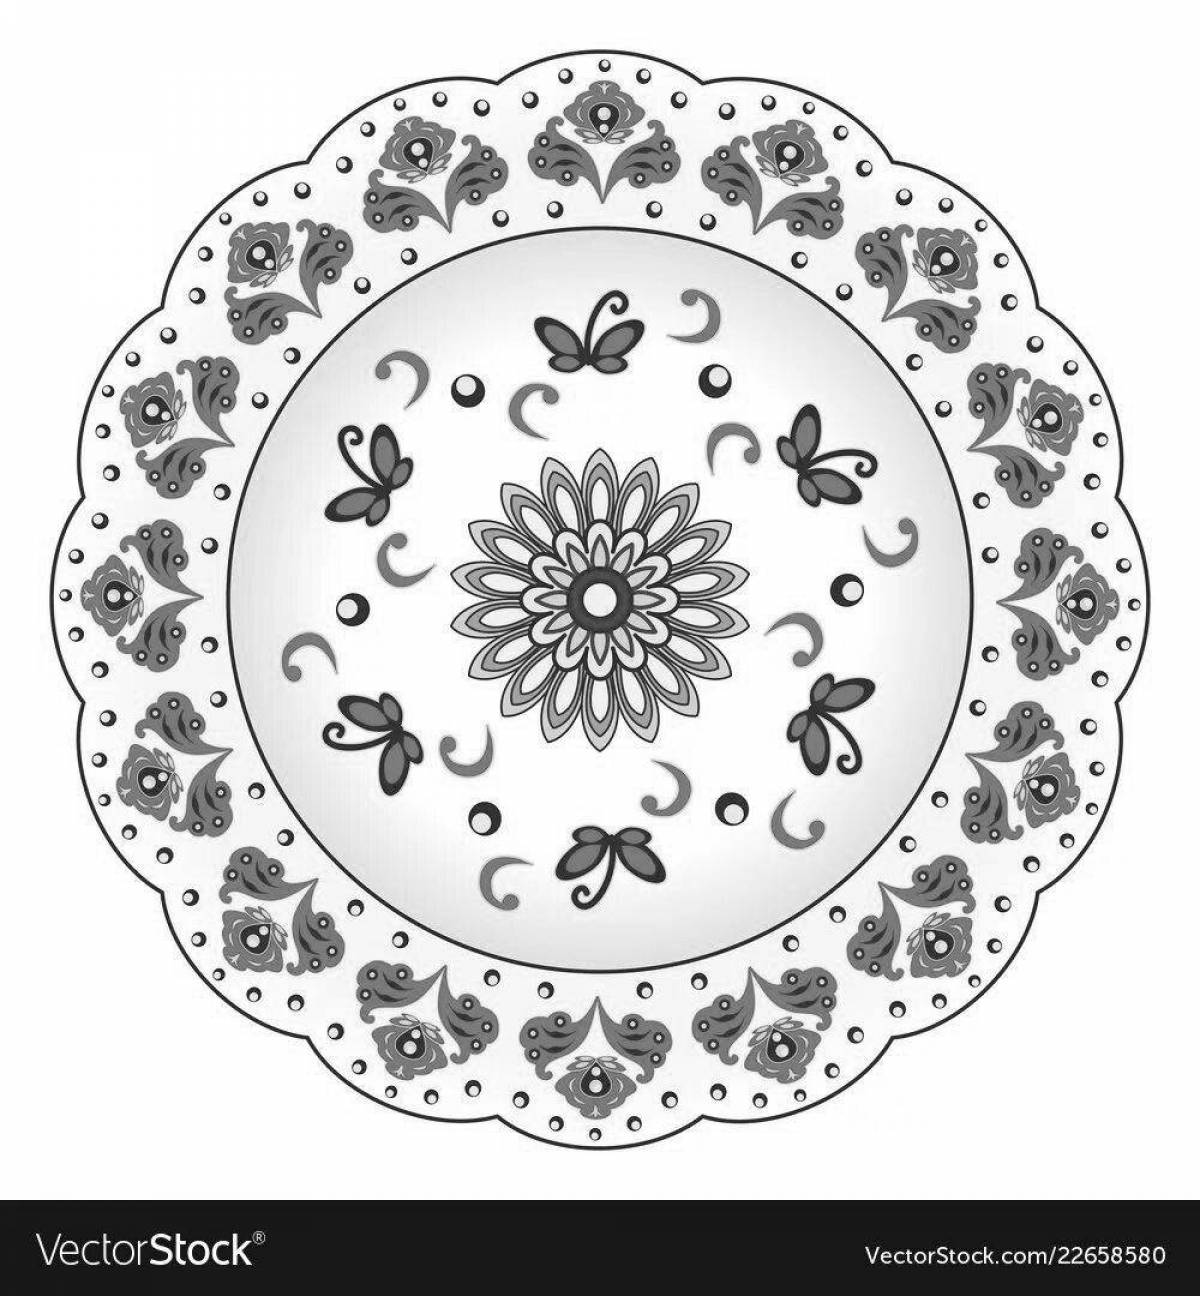 Coloring page for colorful and detailed Gzhel plate